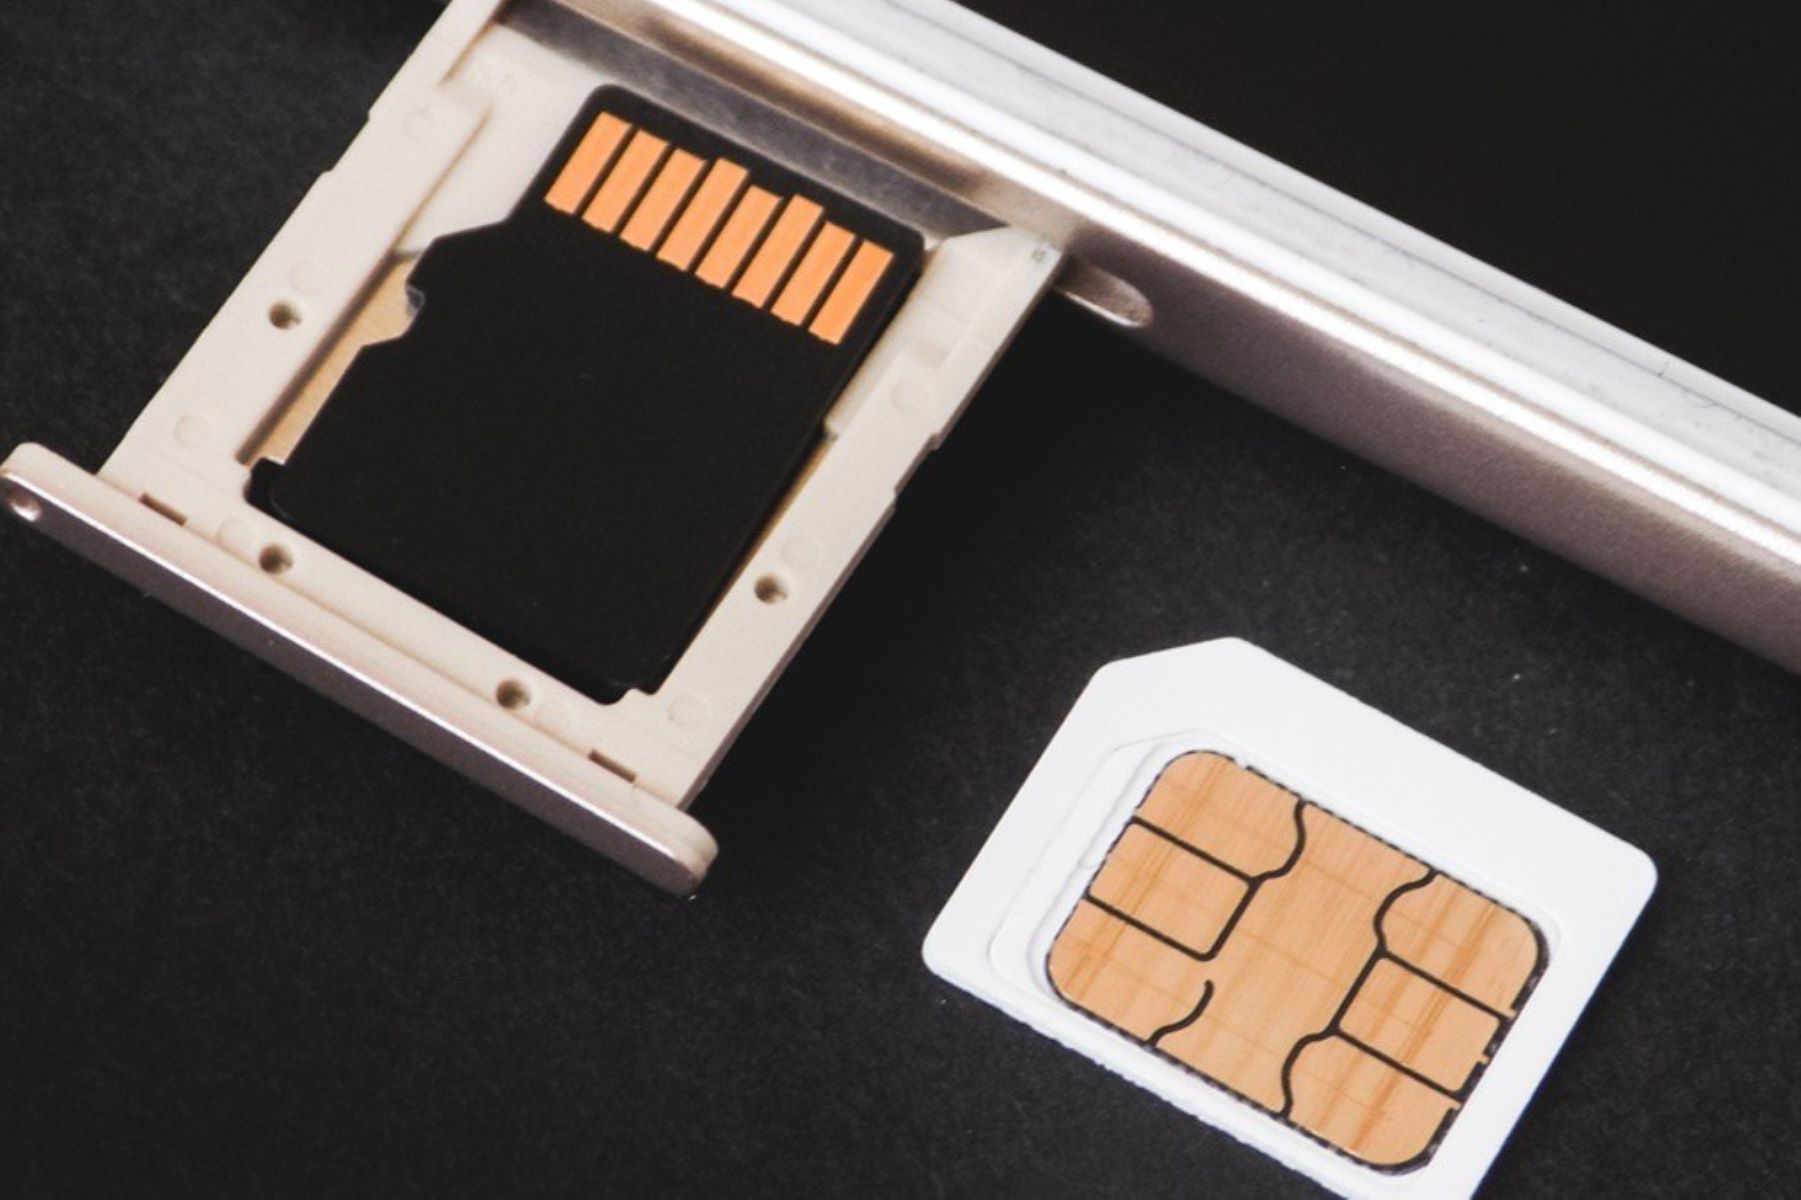 Clearing Data On Your SIM Card: Step-by-Step Process